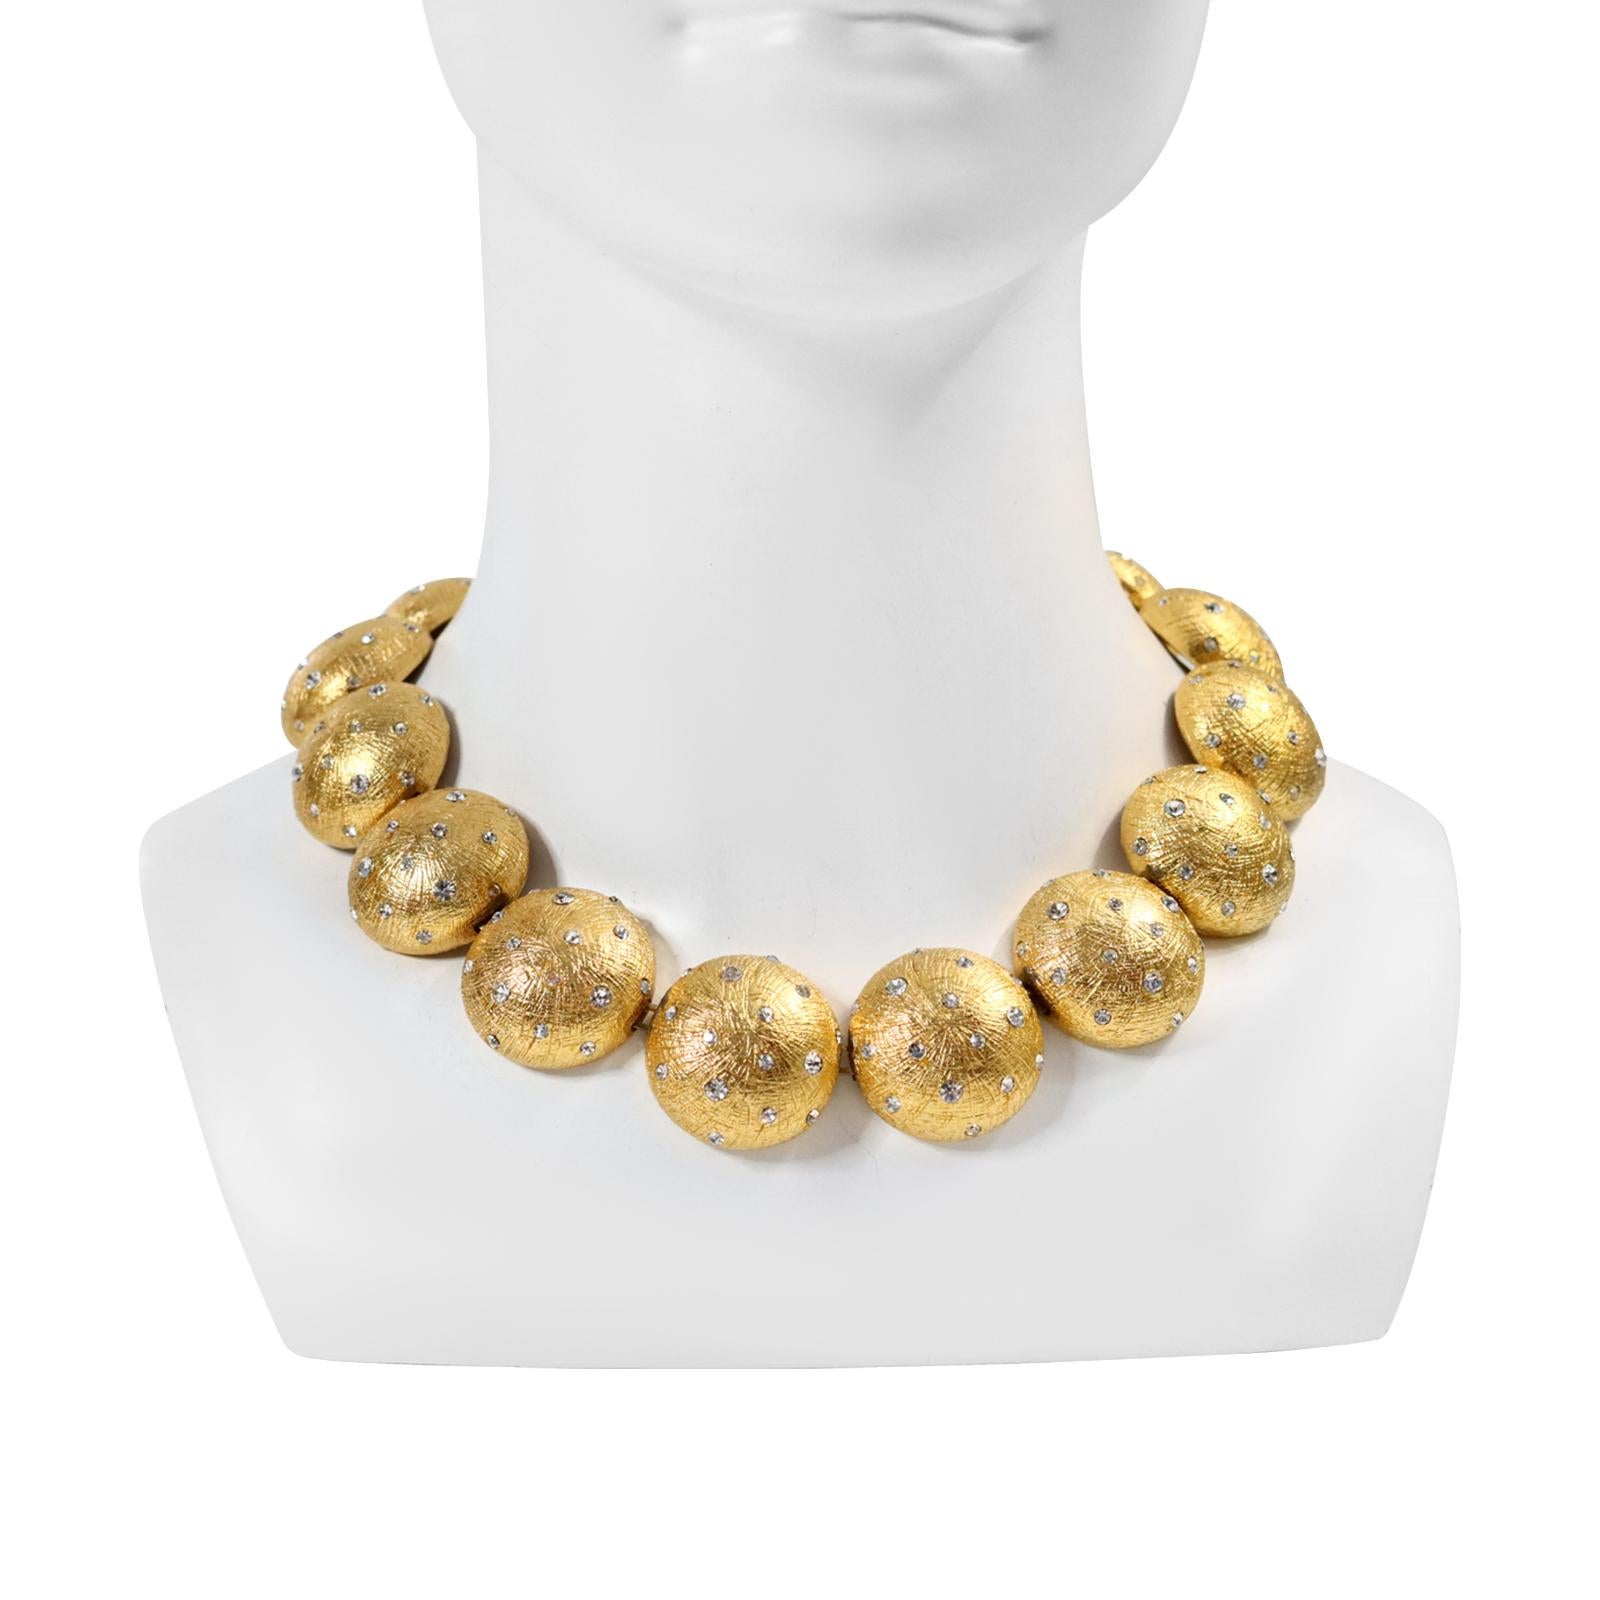 Vintage Christian Dior Gold Disc Necklace with Crystals Circa 1980s In Good Condition For Sale In New York, NY